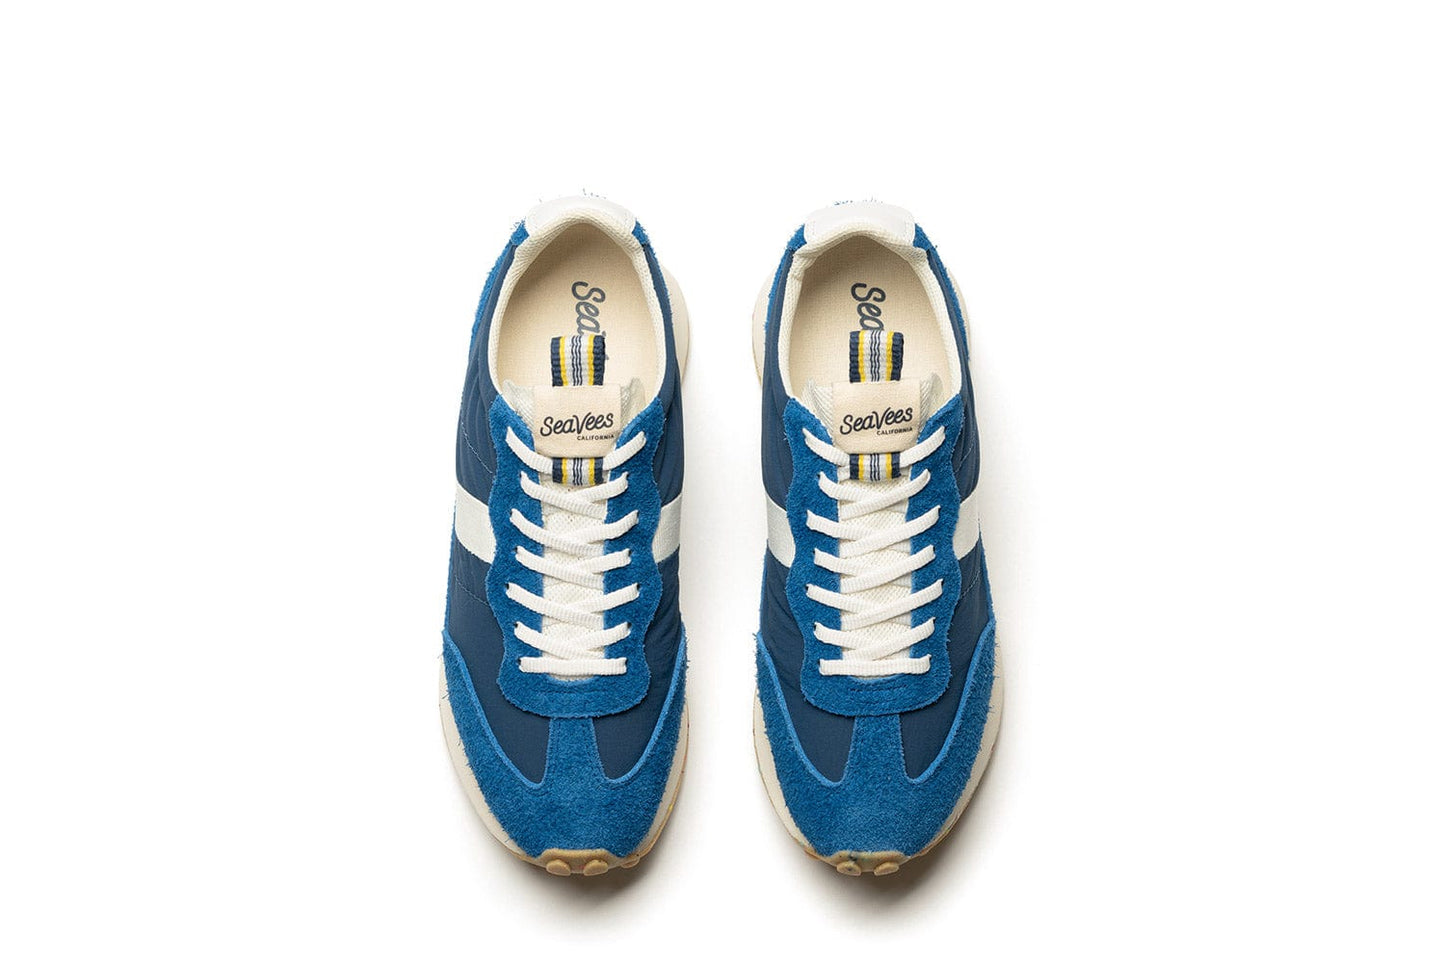 A top down view of the Acorn Trainer in Varsity Blue, showcasing branding and white laces.